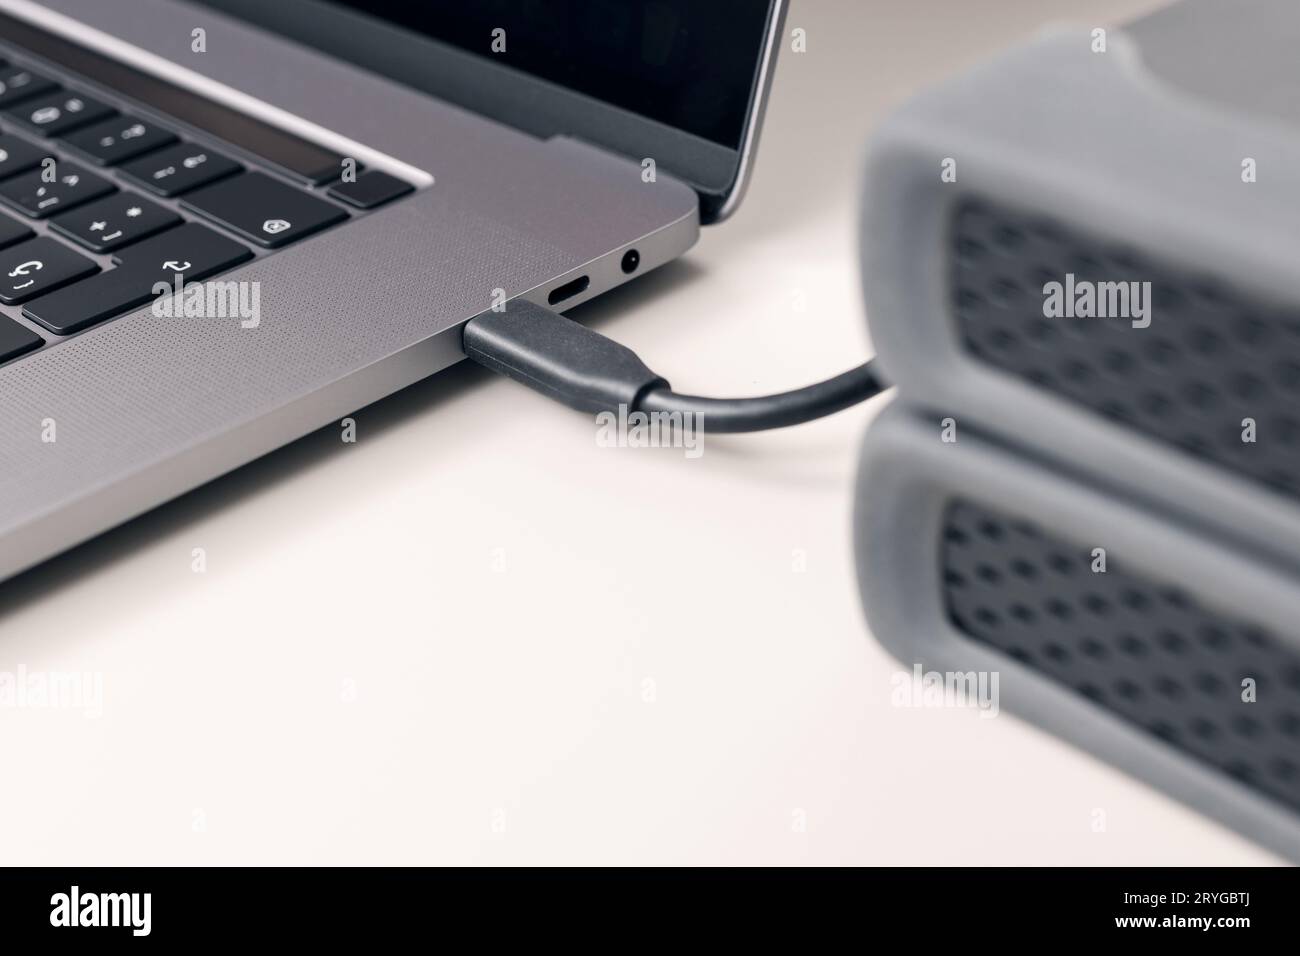 Detail of External hard disk cable connected to a modern laptop computer Stock Photo